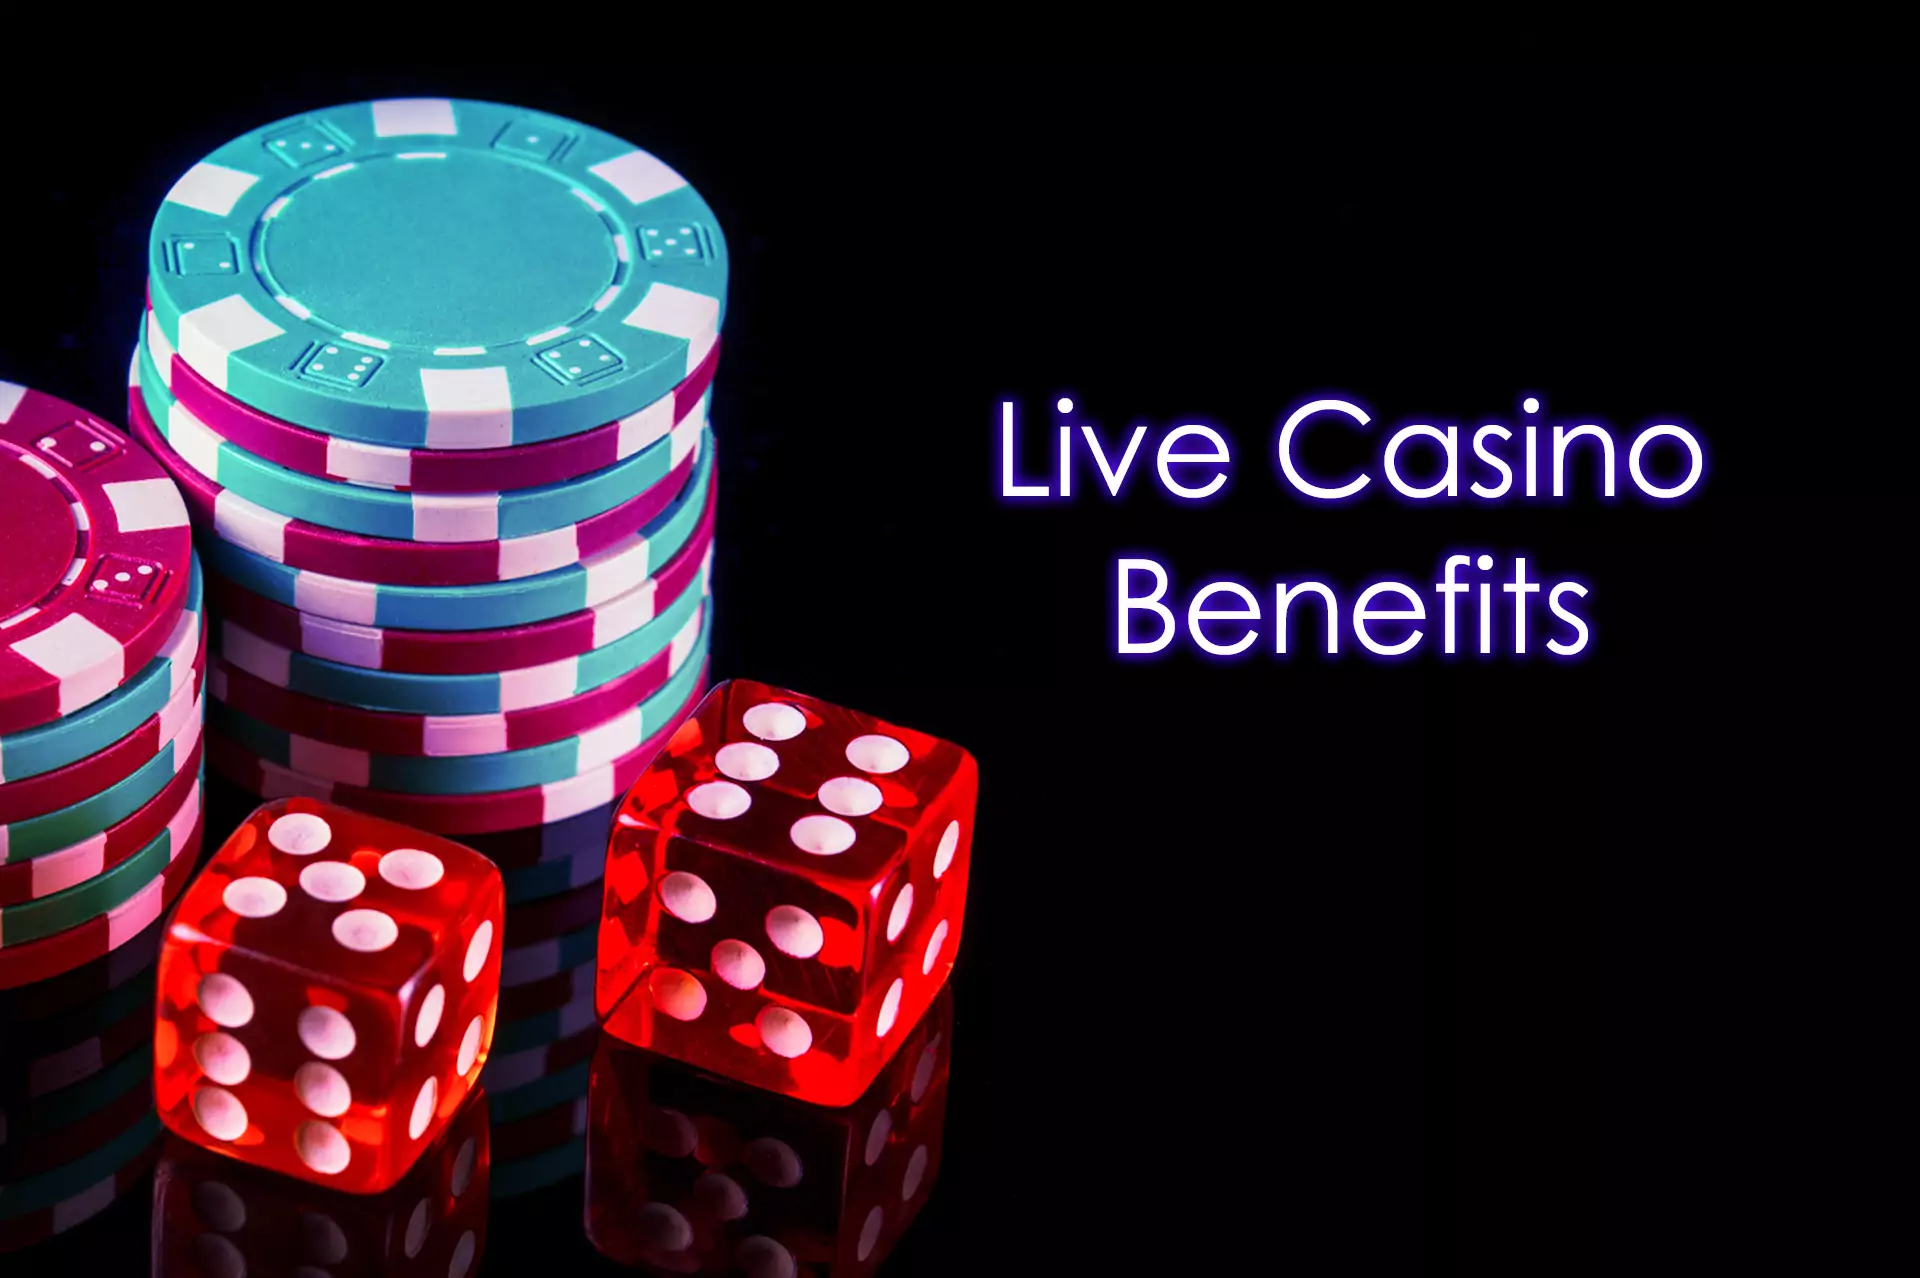 Live casinos attract users with their interactivity, live dealer's support and communication in real-time.